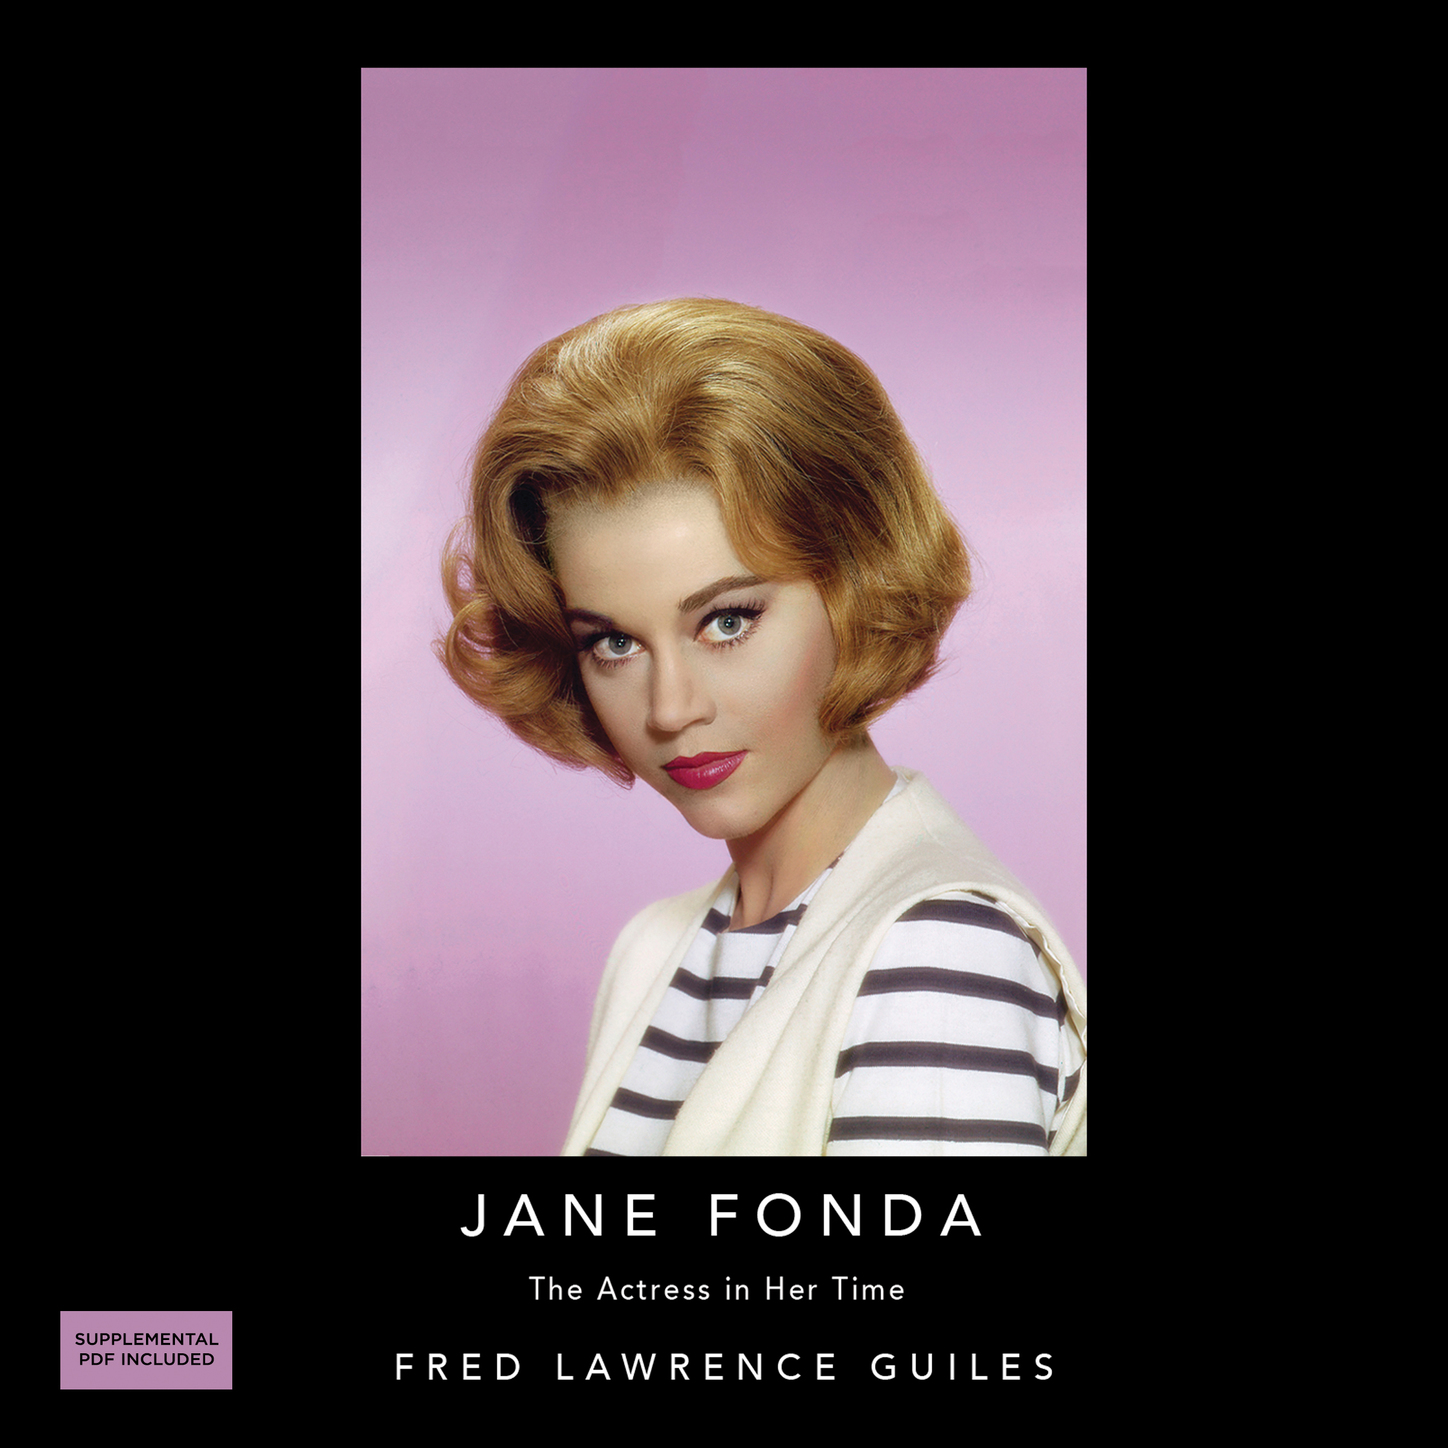 Скачать Jane Fonda: The Actress in Her Time - Fred Lawrence Guiles Hollywood Collection (Unabridged) - Fred Lawrence Guiles